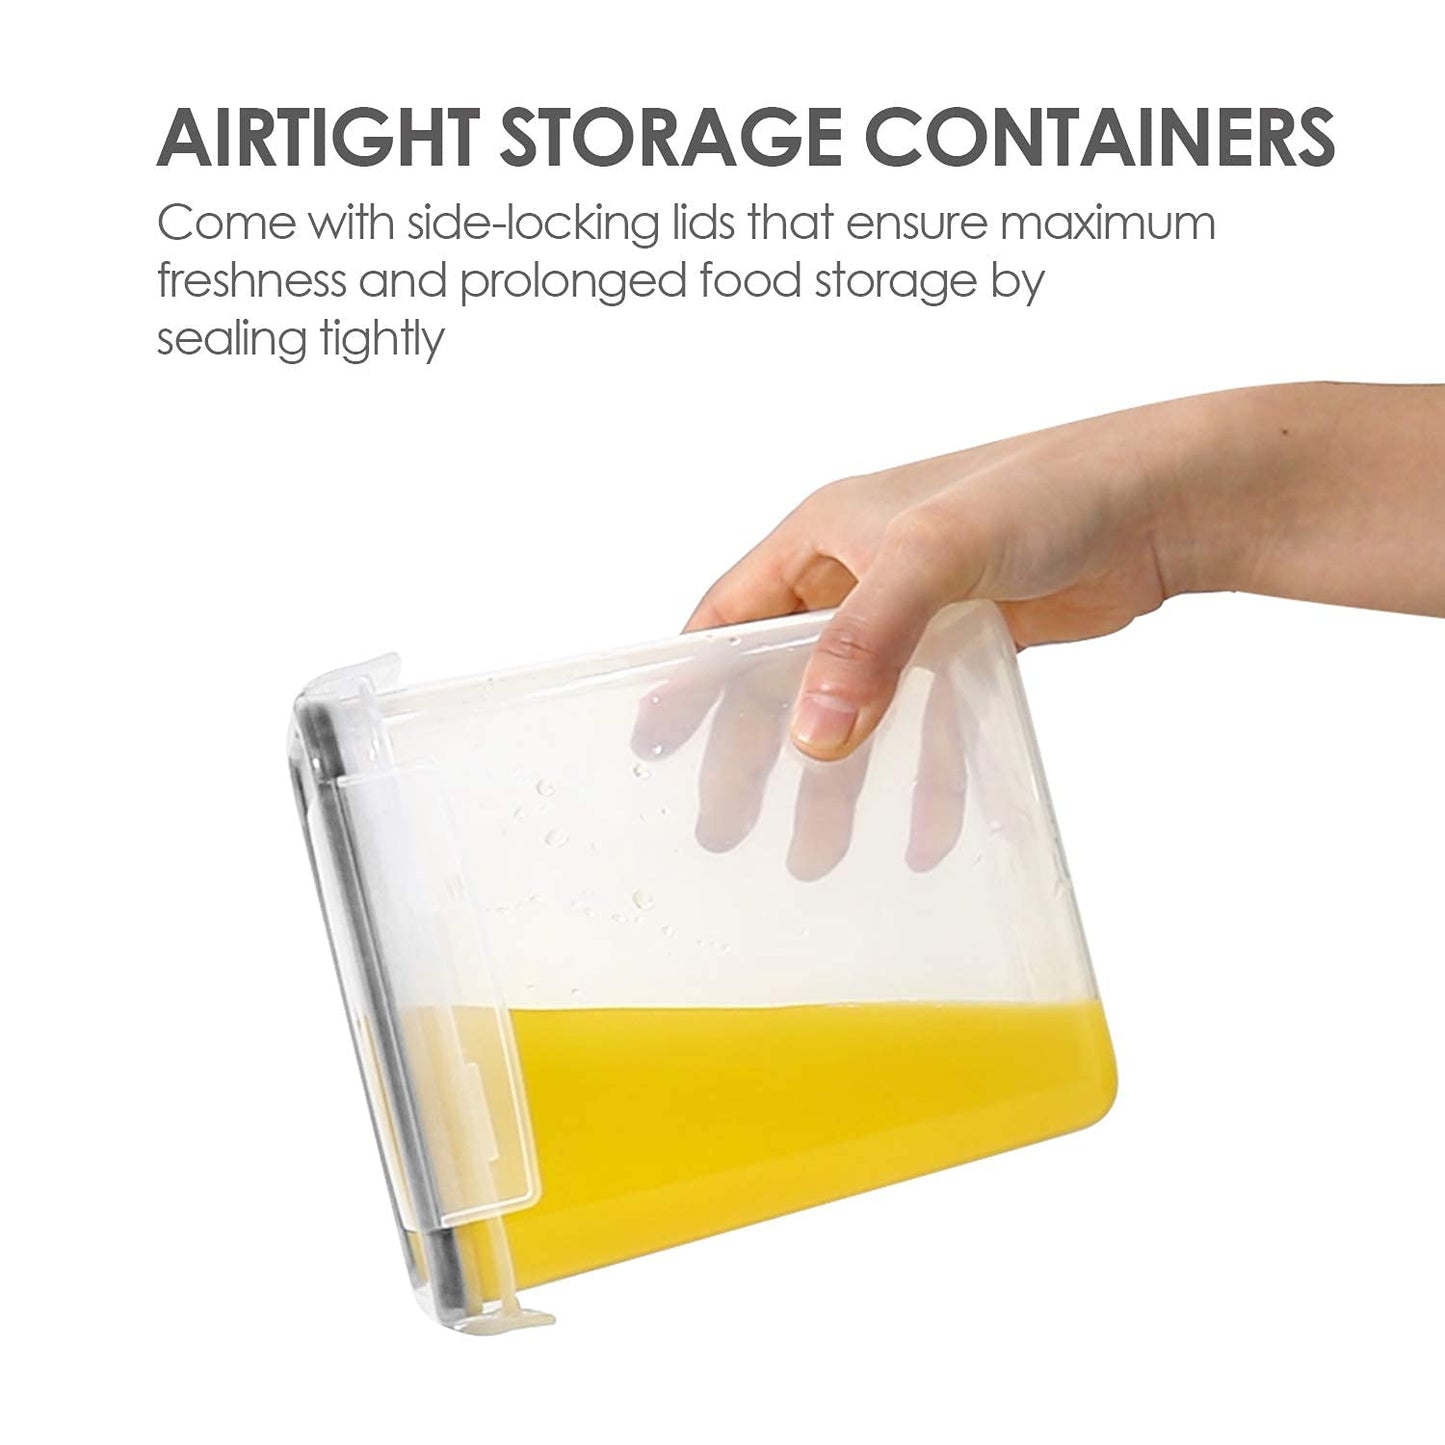 24 Food containers